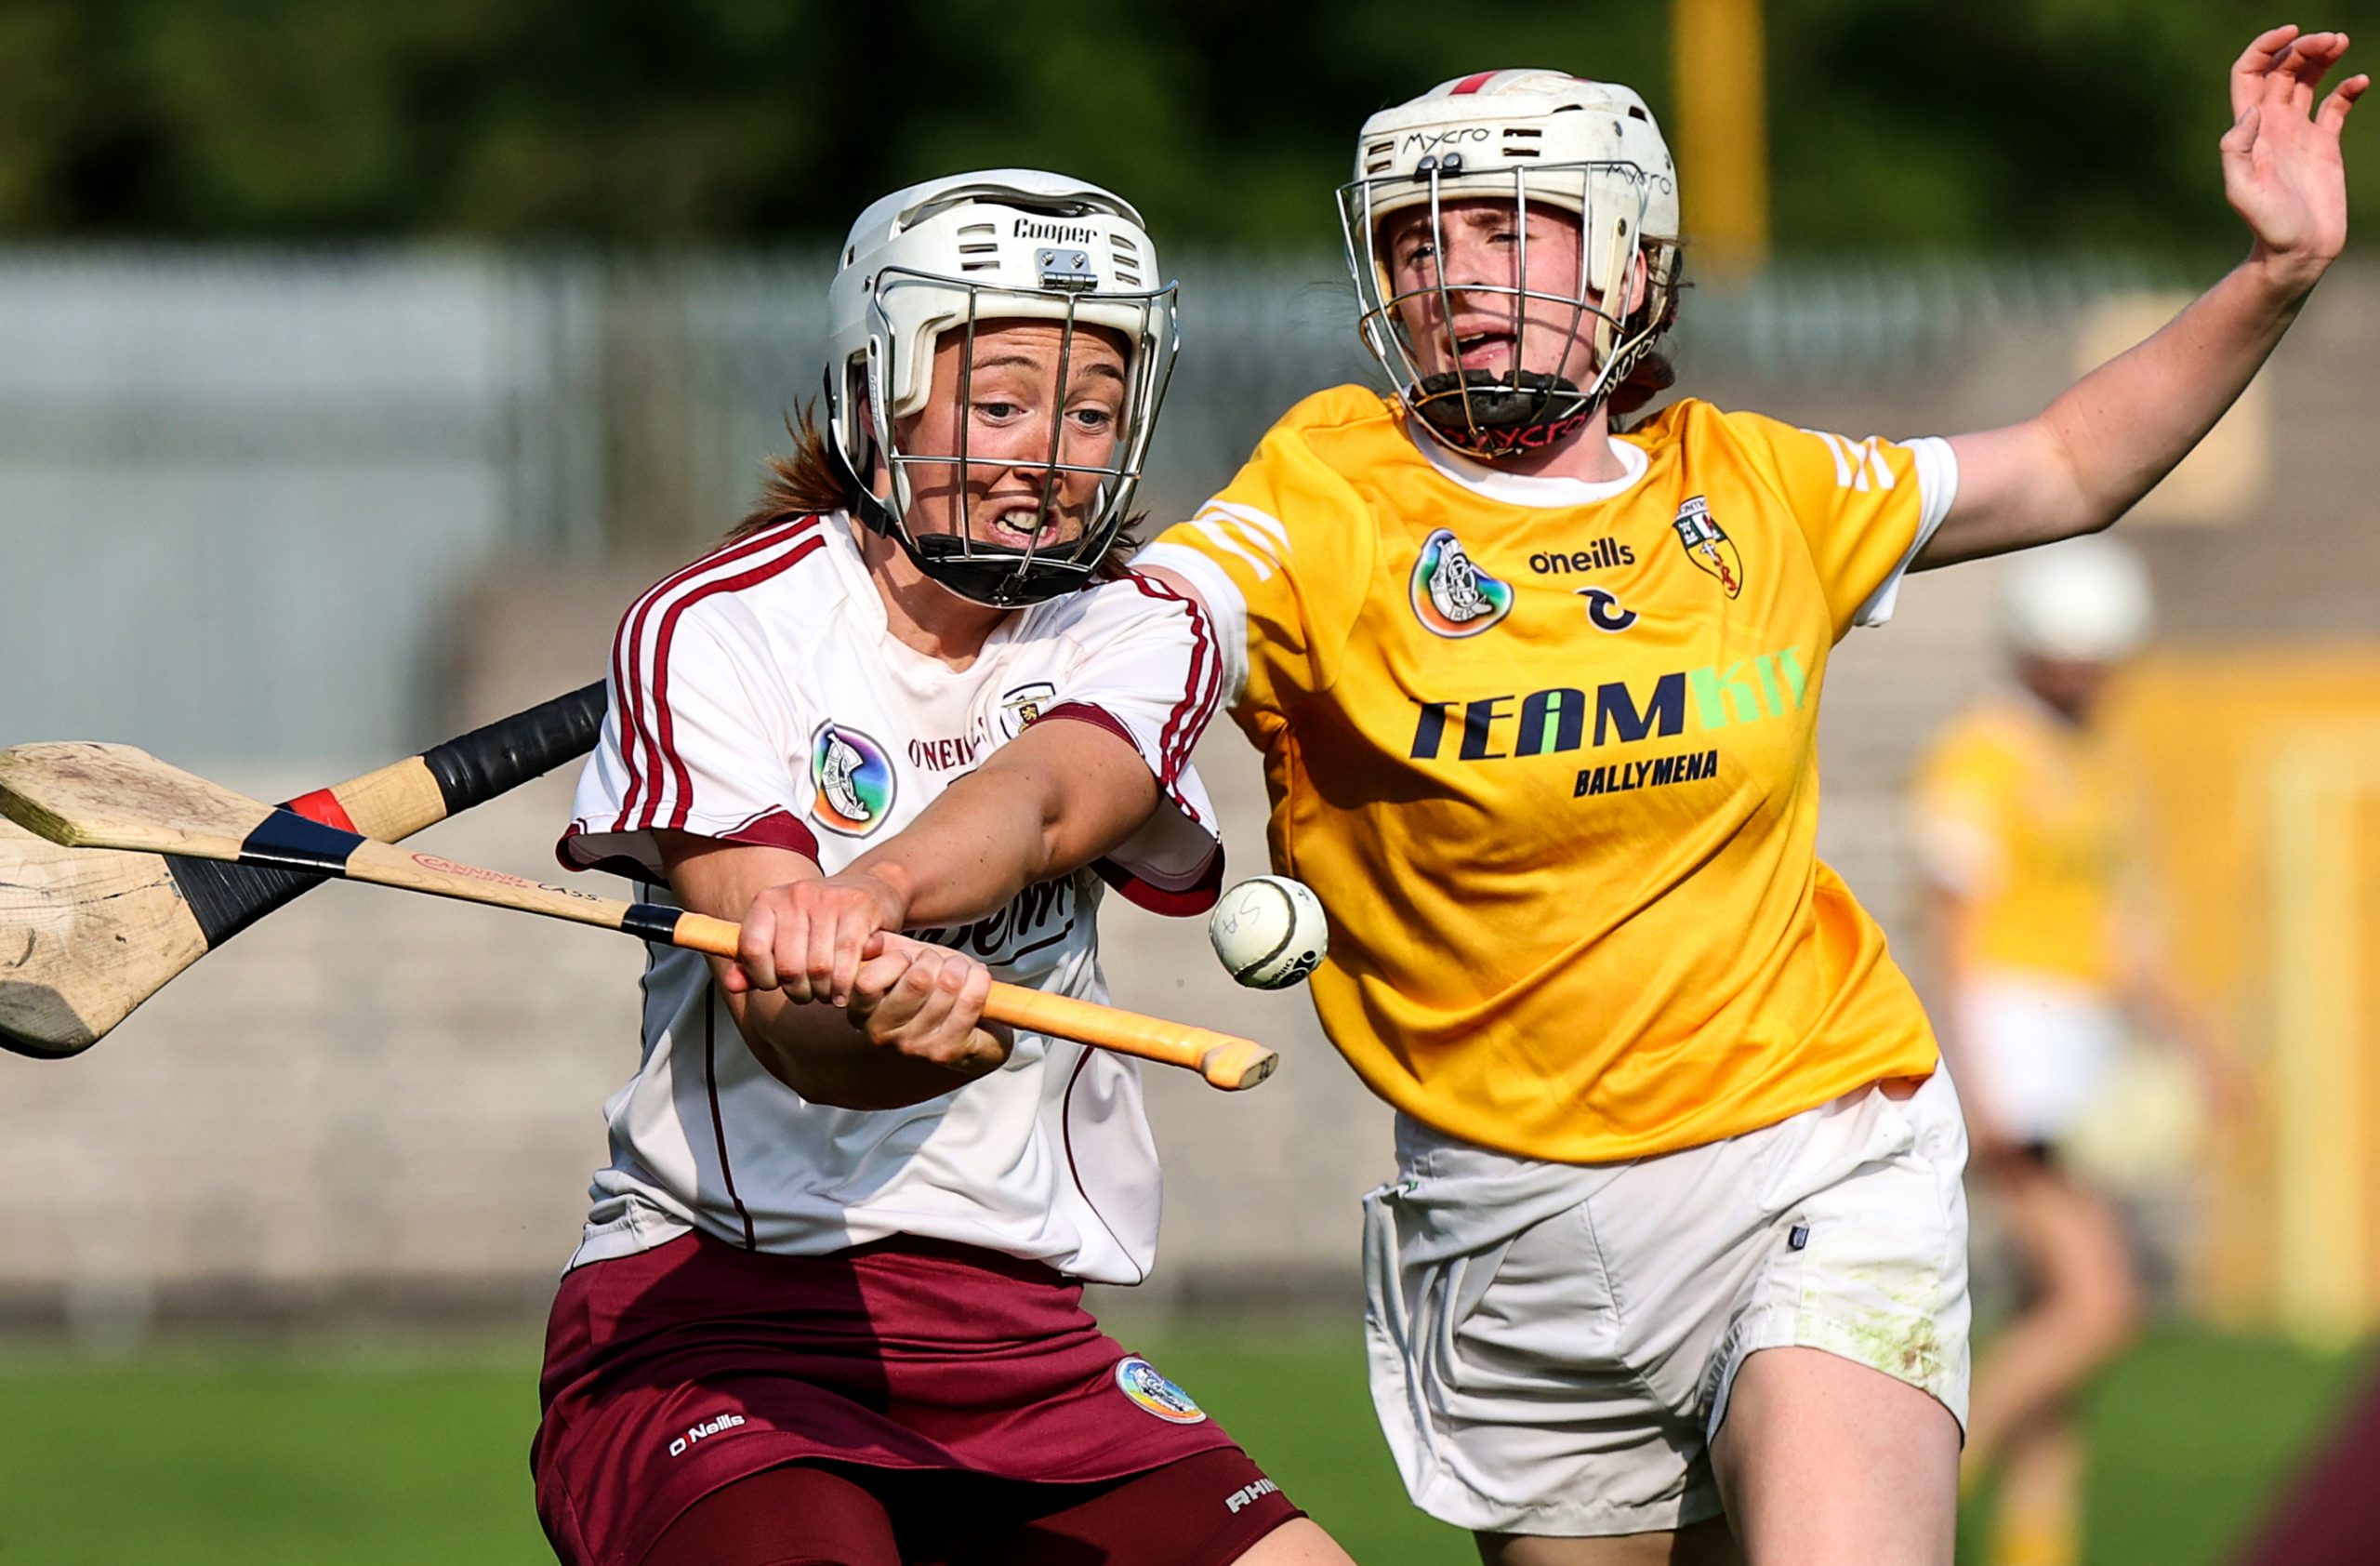 “In our parish, there’s not a lot else to do. It’s play hurling and camogie, and go to mass”